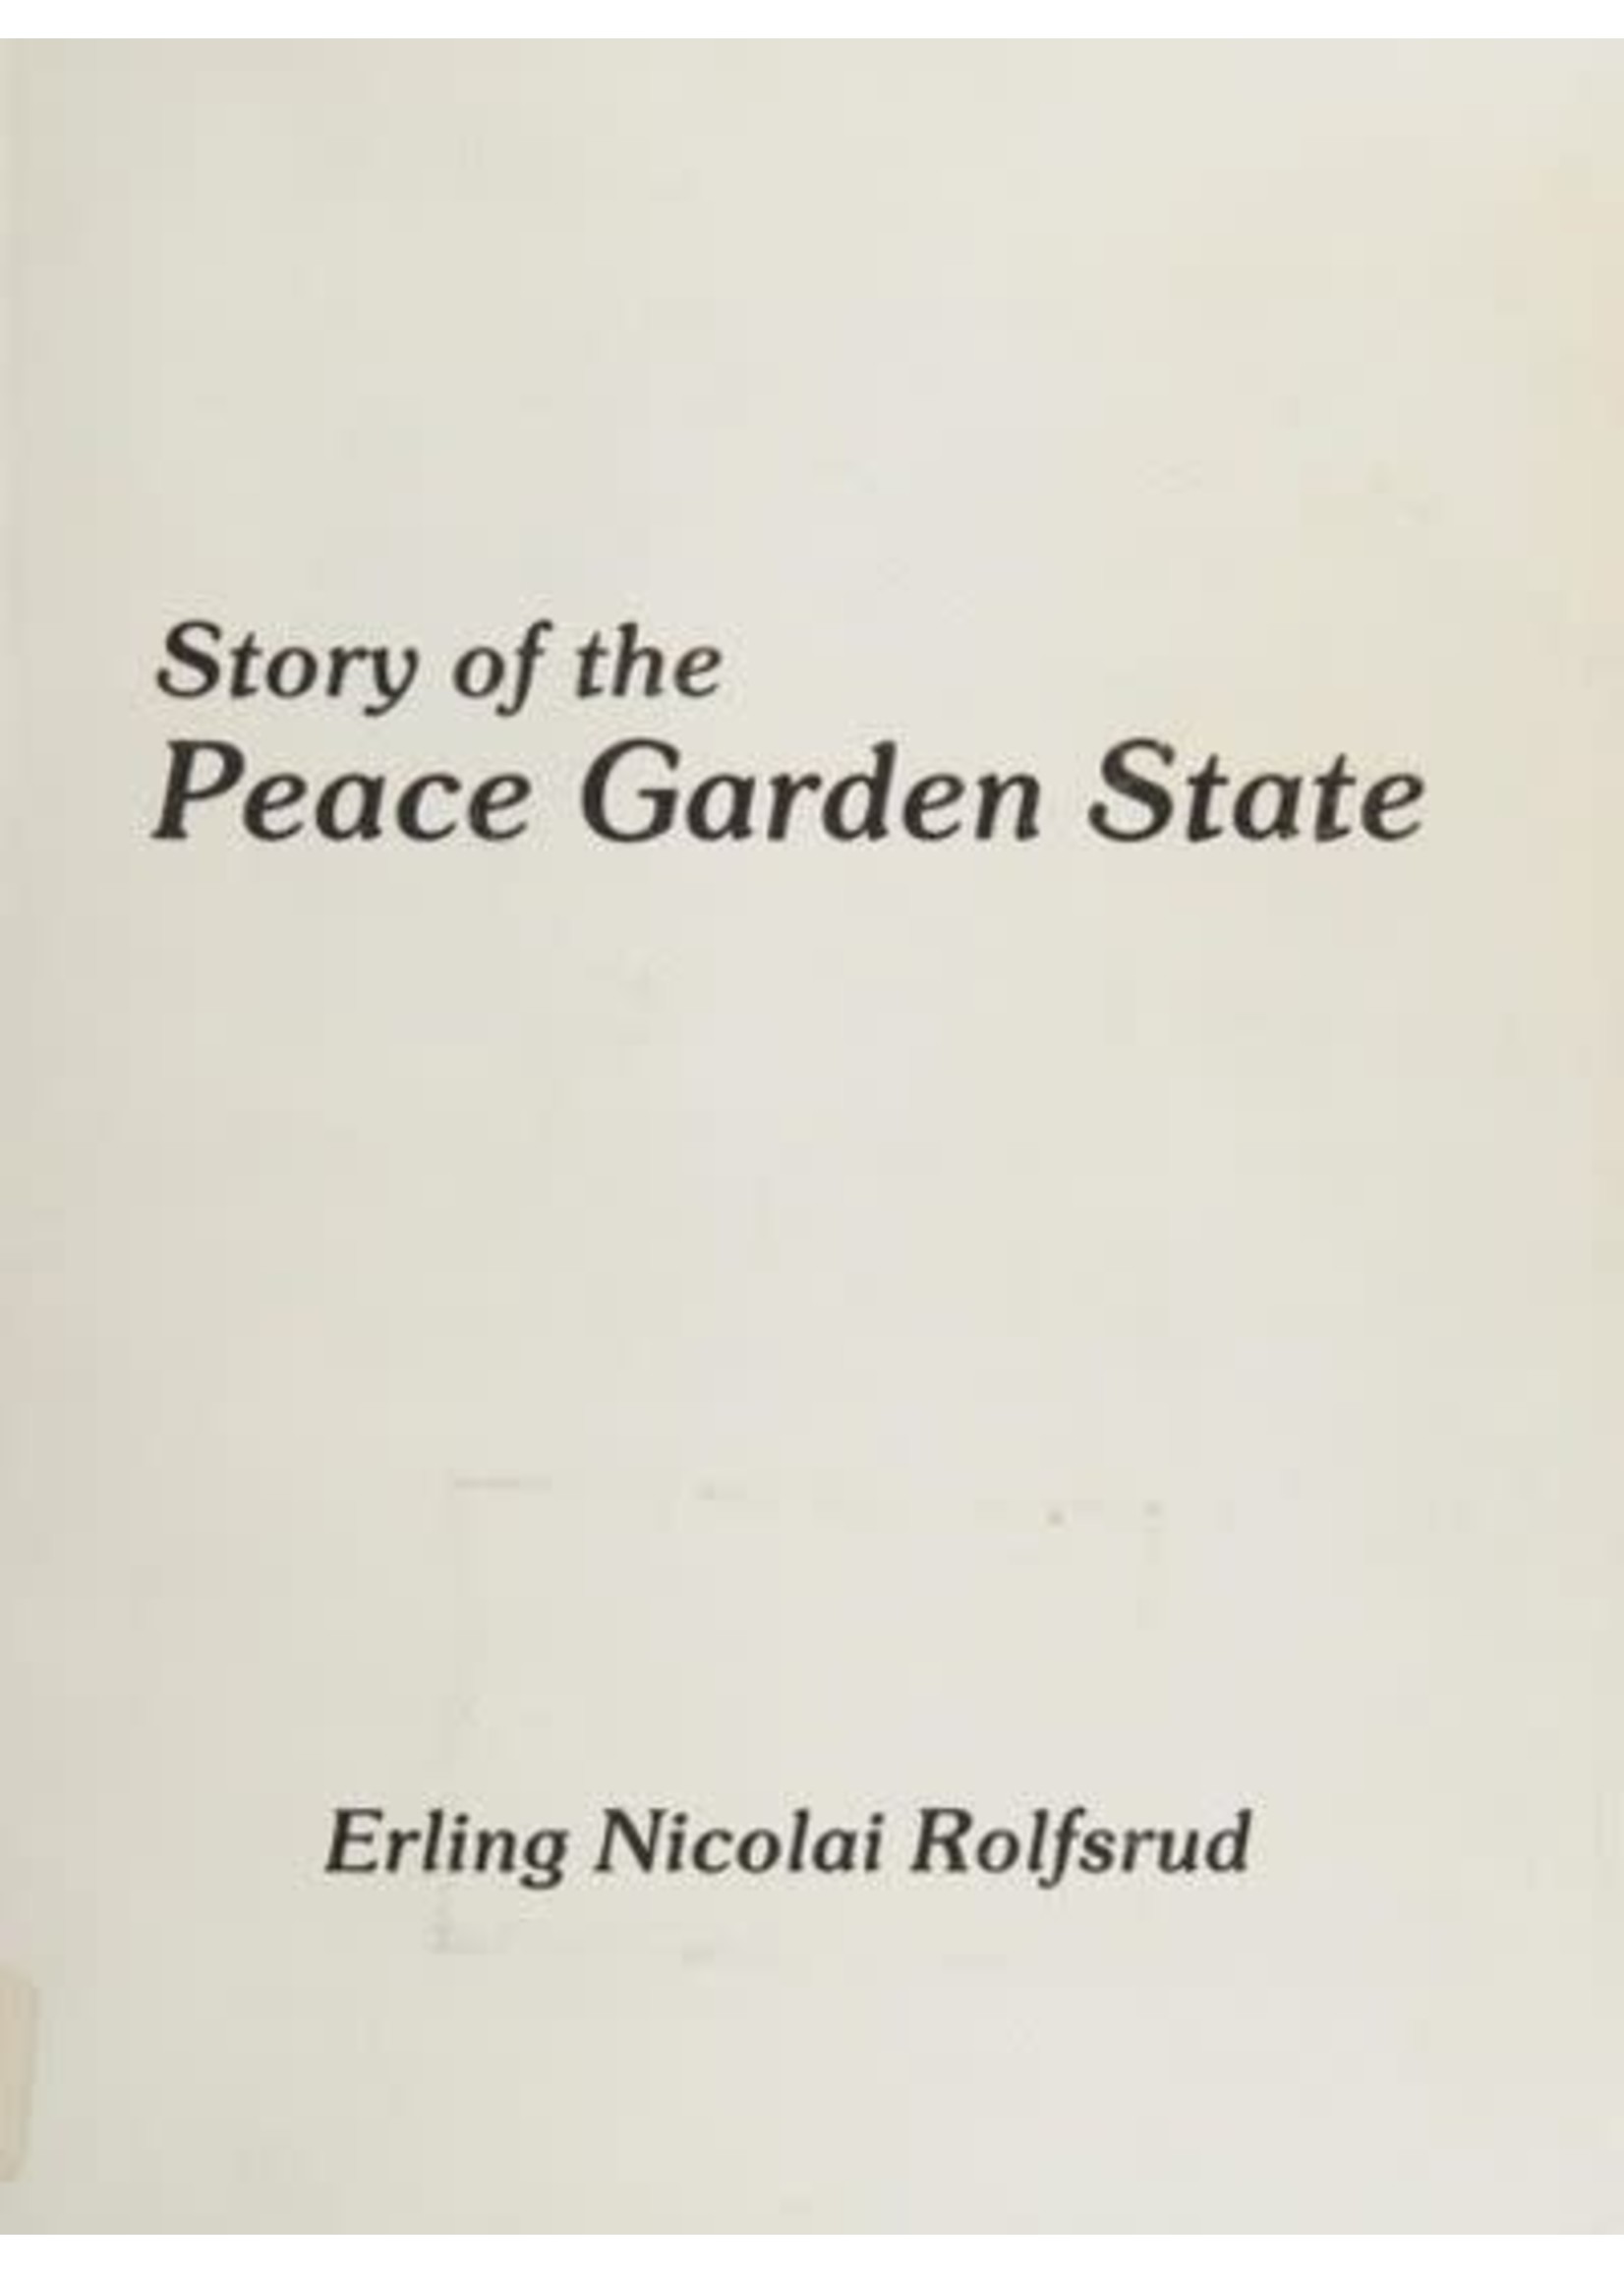 Story of the Peace Garden State